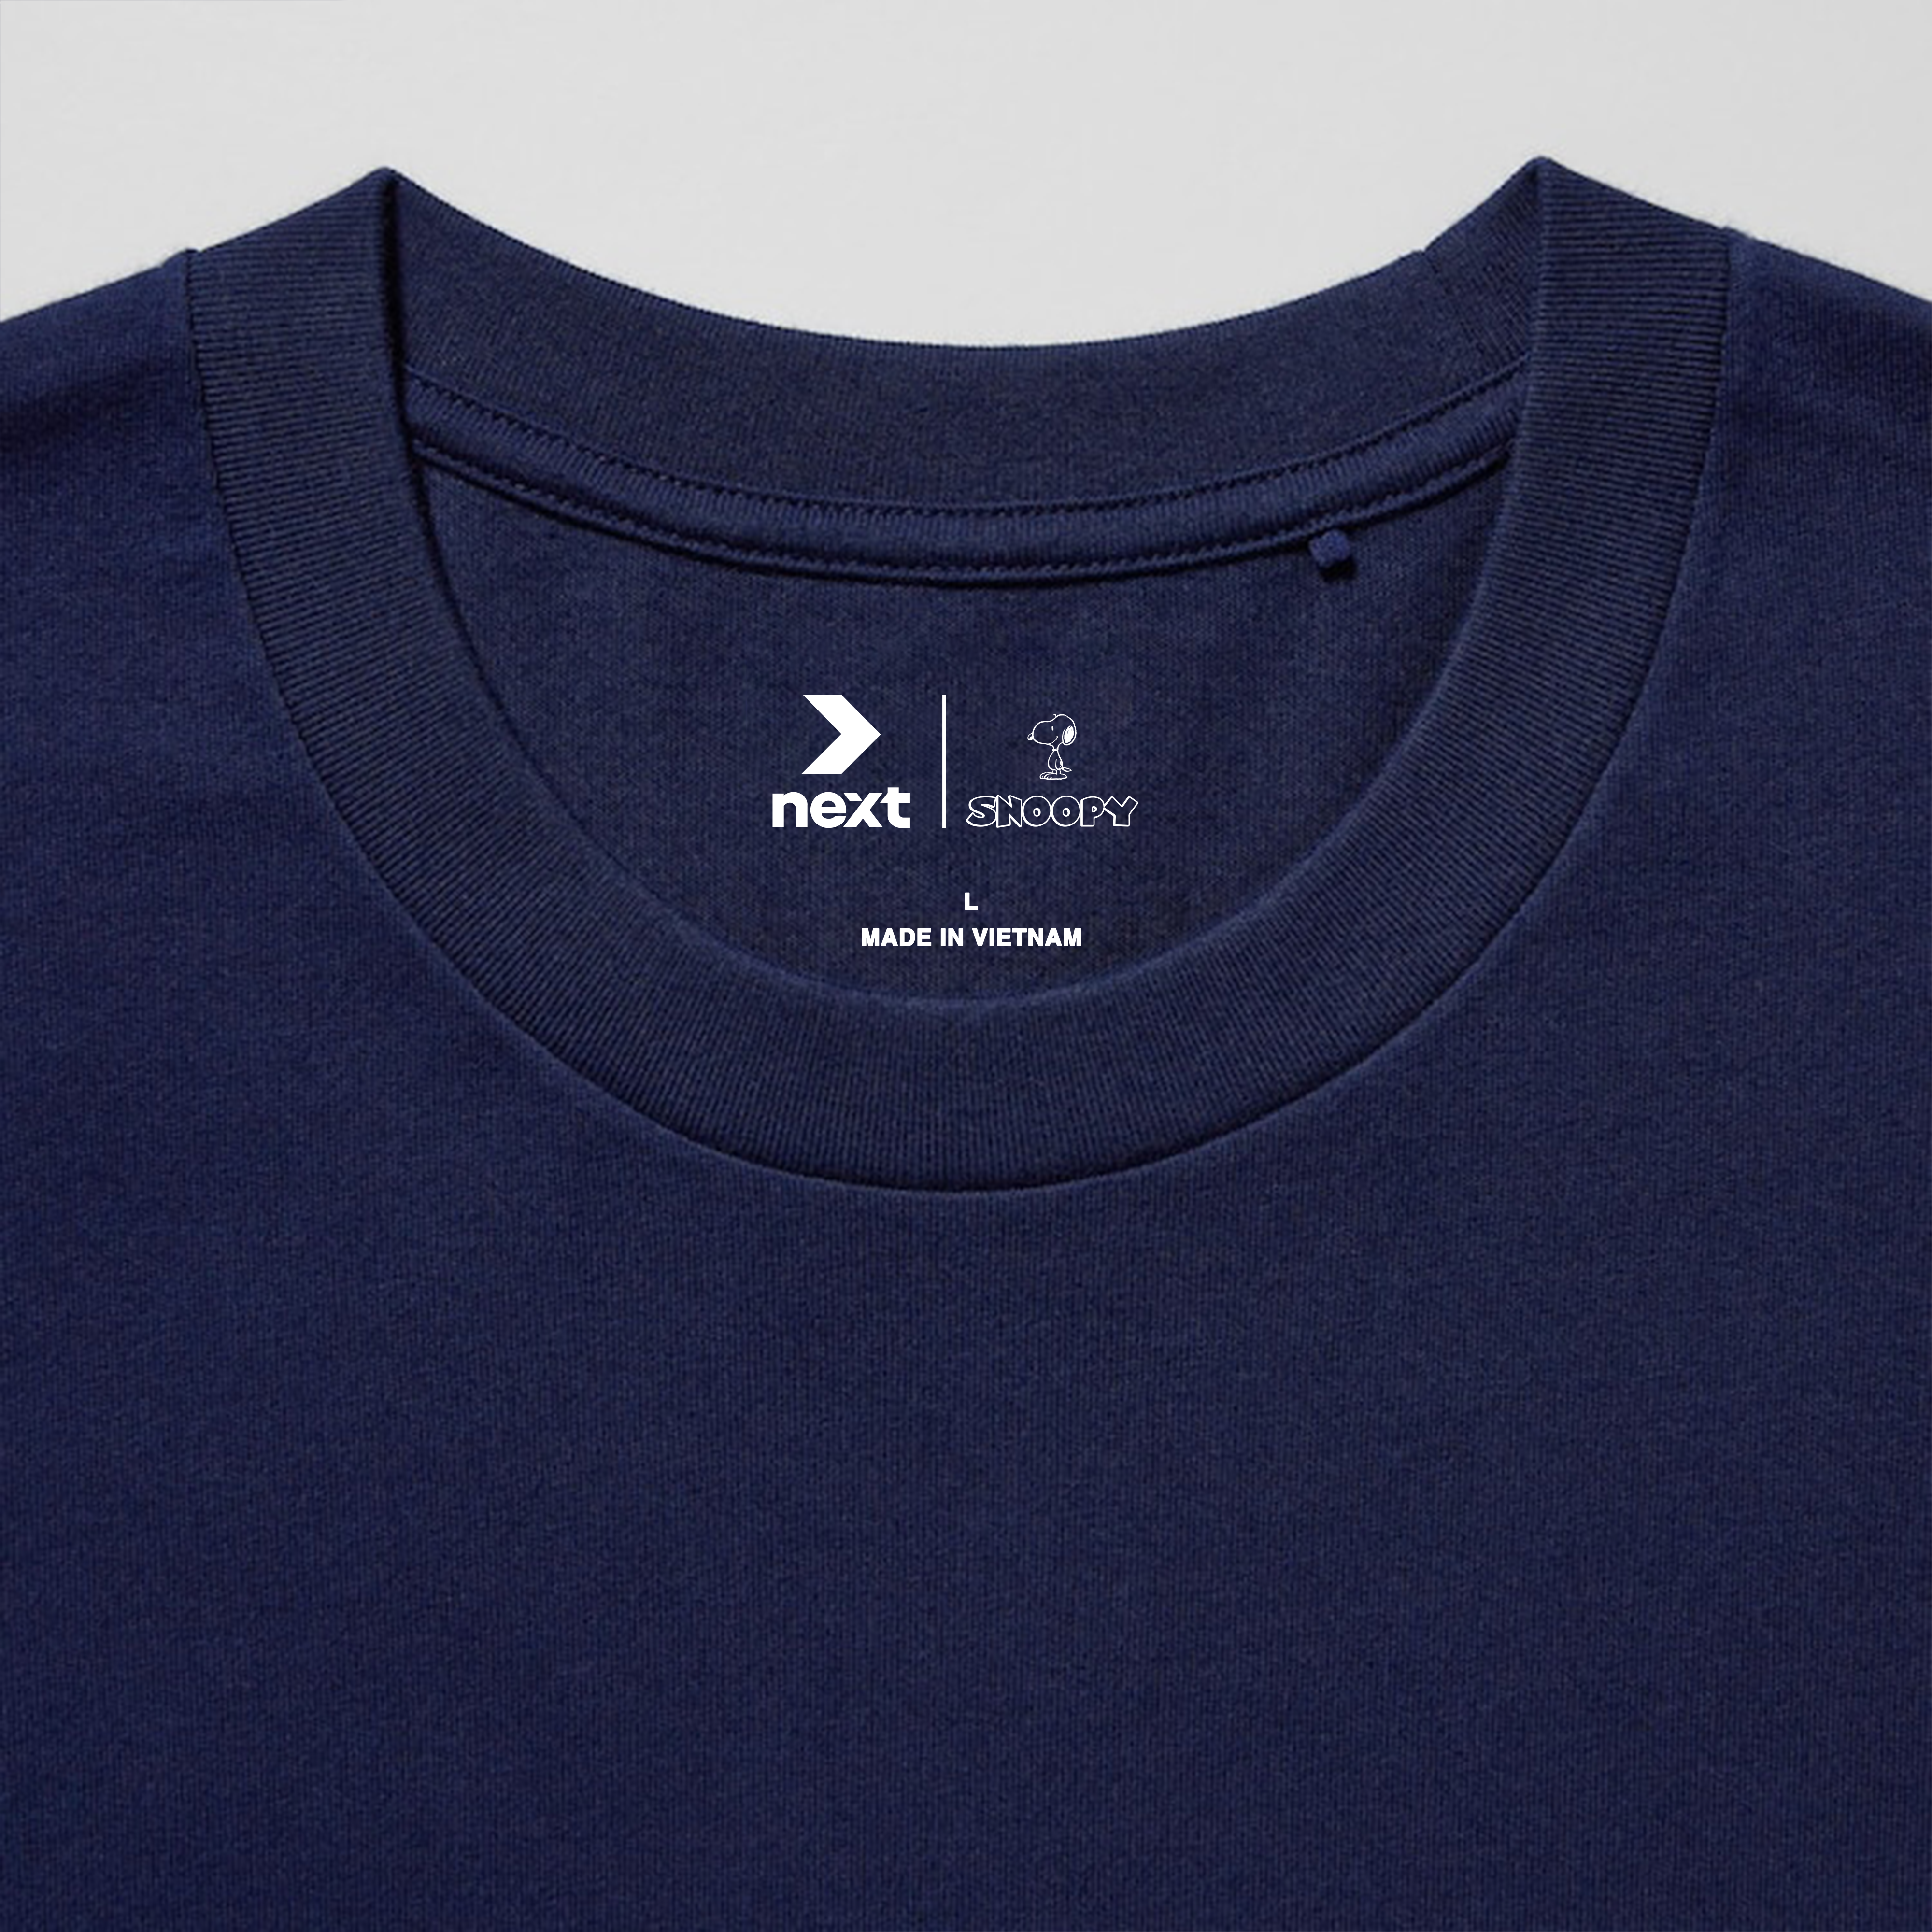 SNOOPY 4EVER T-SHIRT / NAVY